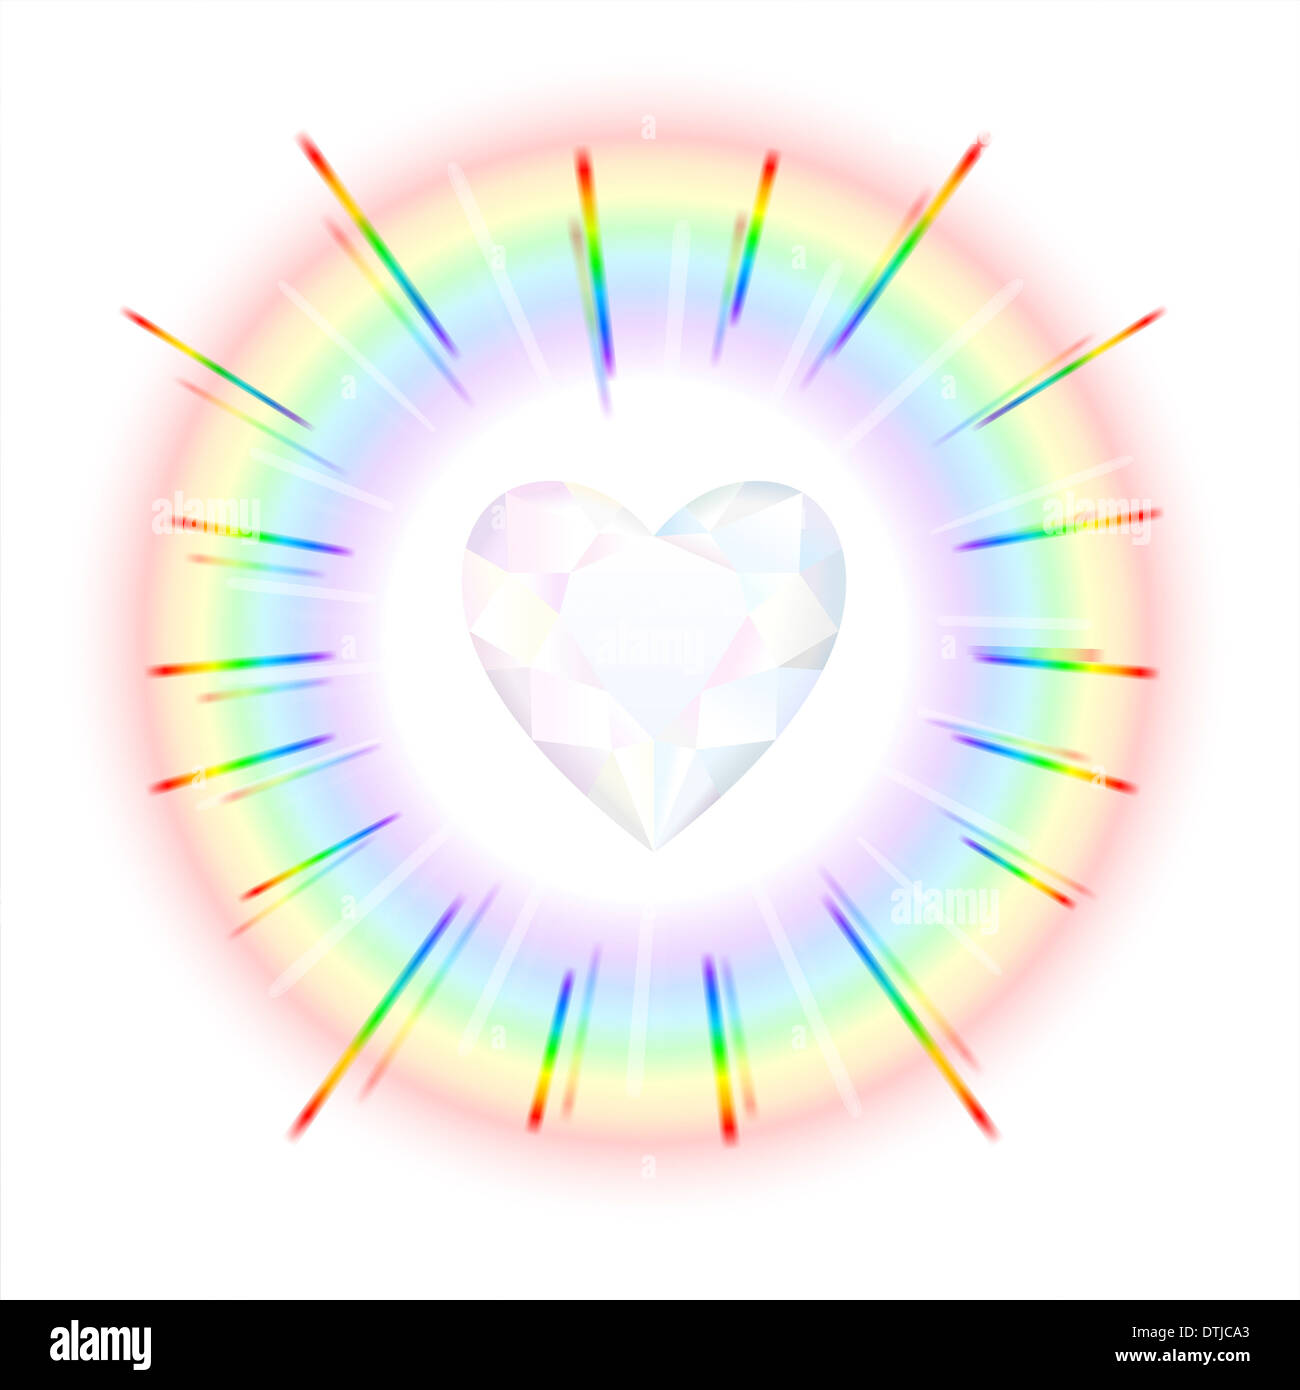 Finely polished crystal in the shape of a heart with rainbow colored beams. Stock Photo